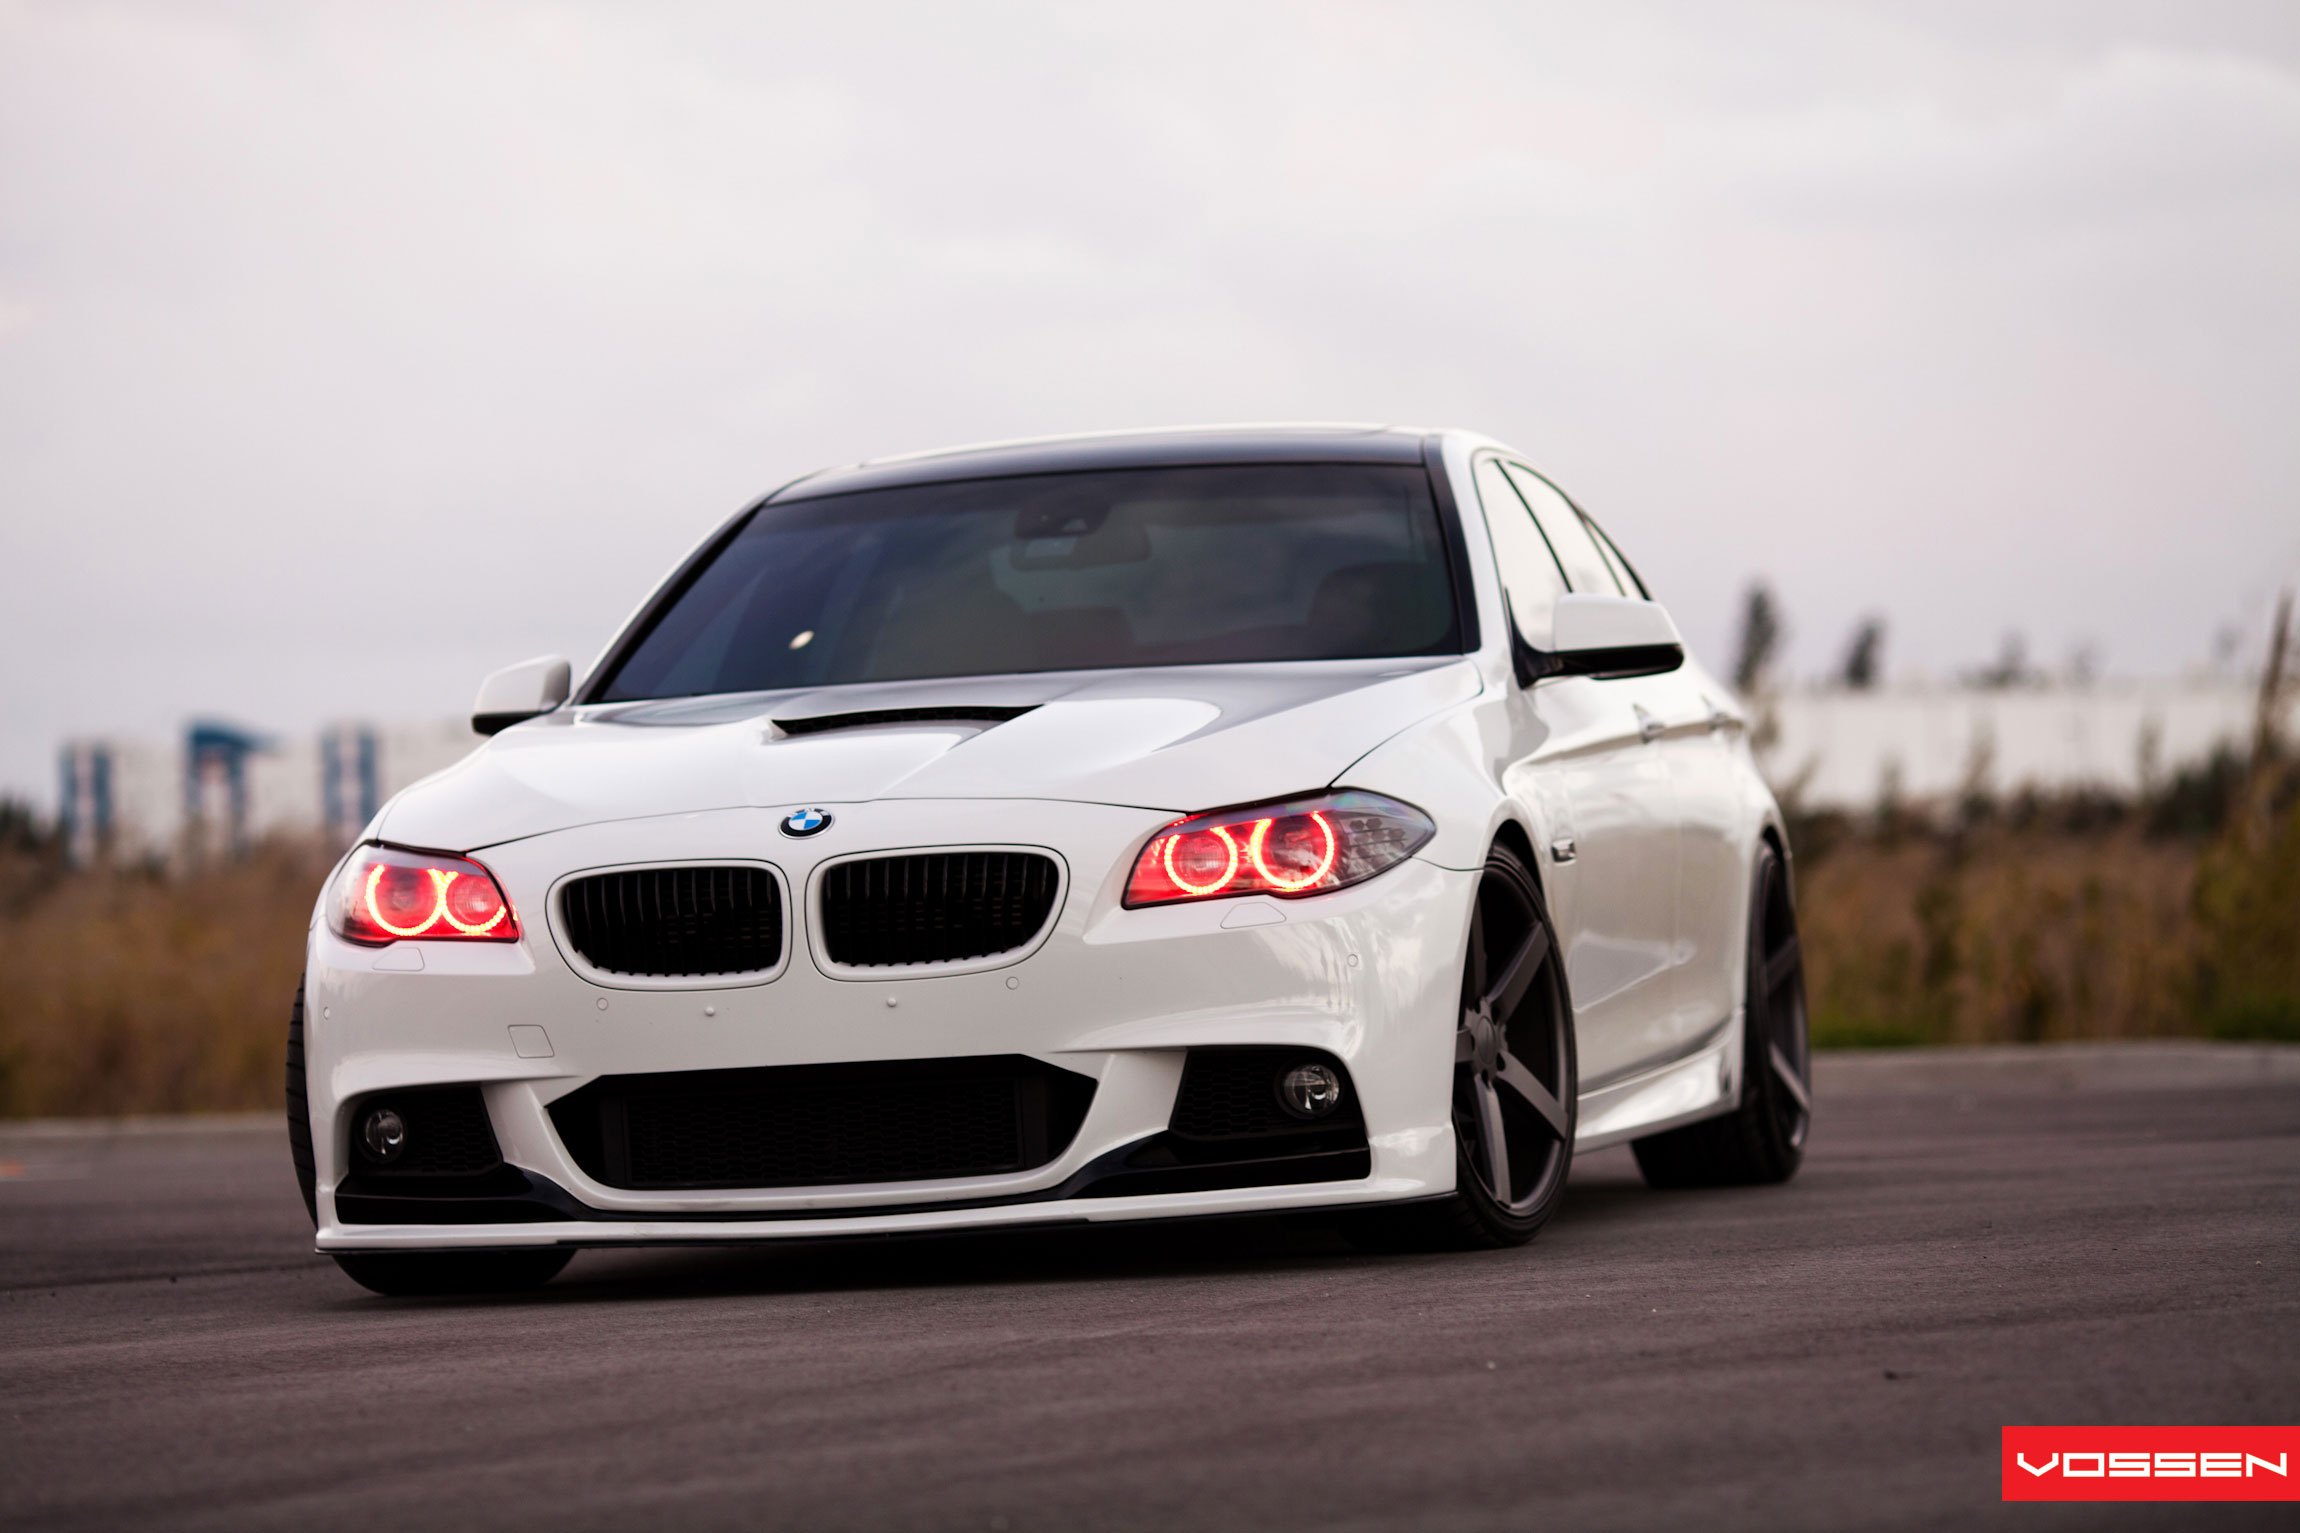 Custom Front Bumper with Fog Lights on White BMW 5-Series - Photo by Vossen